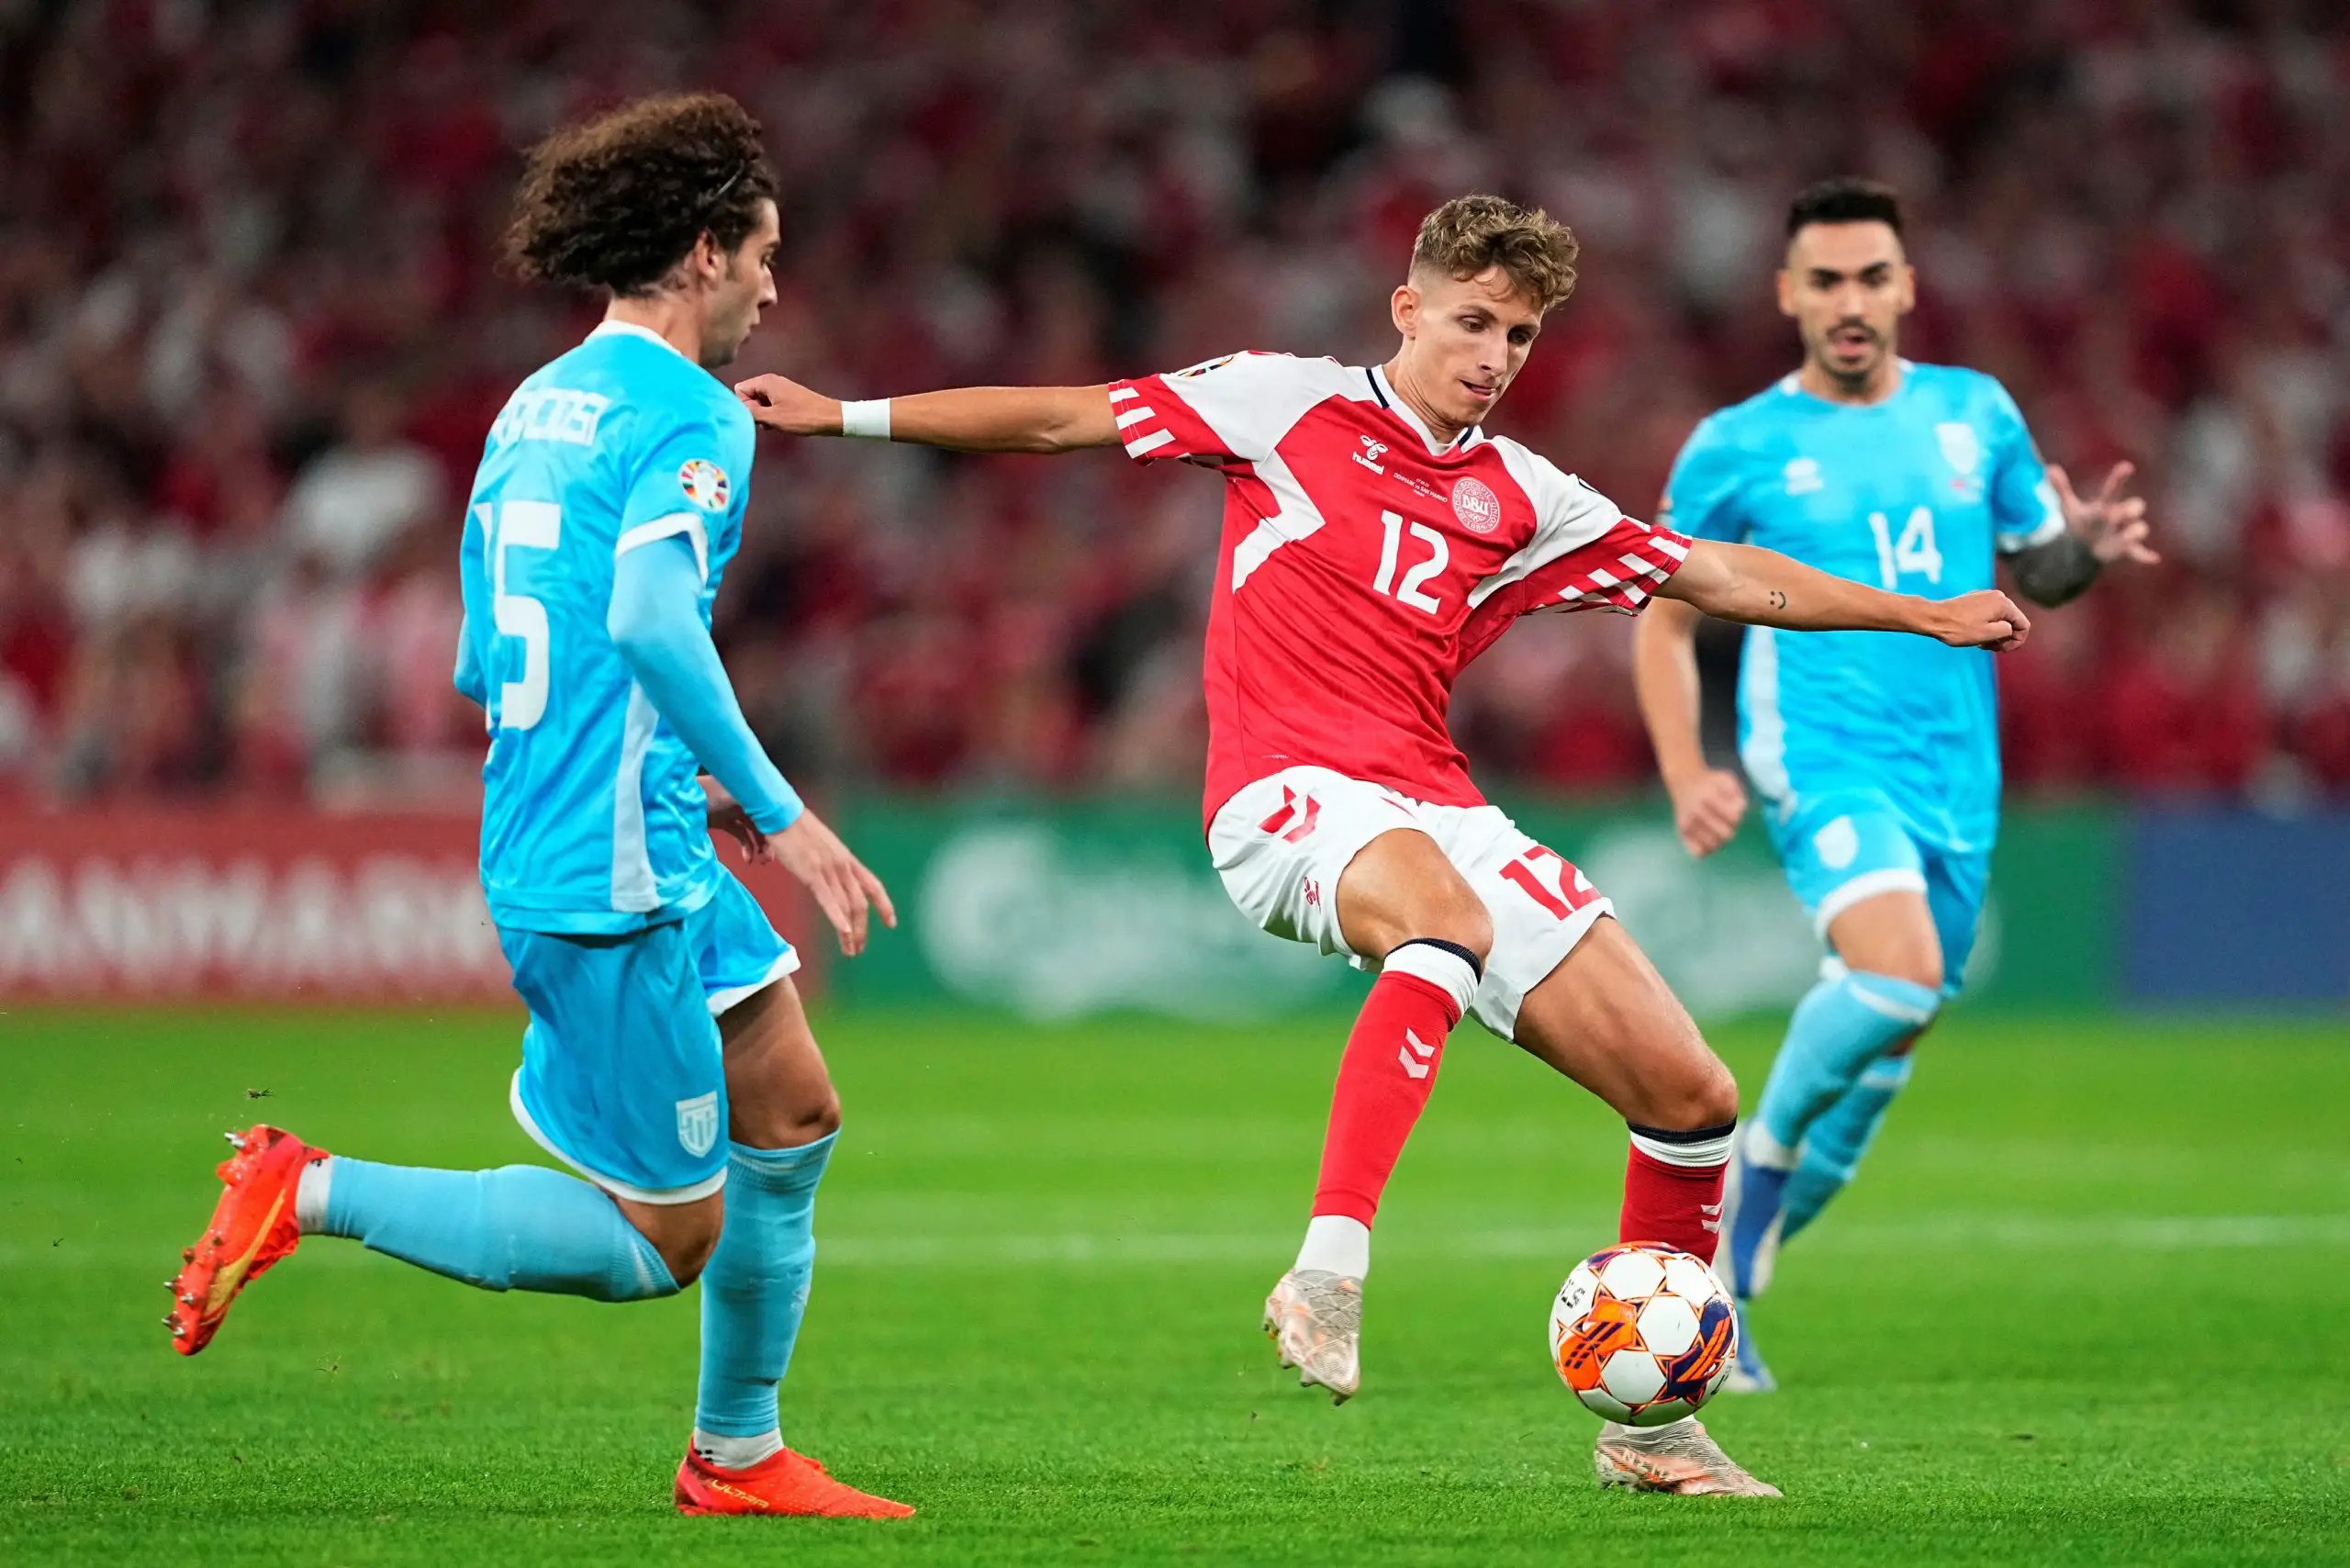 Streaming the San Marino – Denmark Match live: TV & Streaming Channel